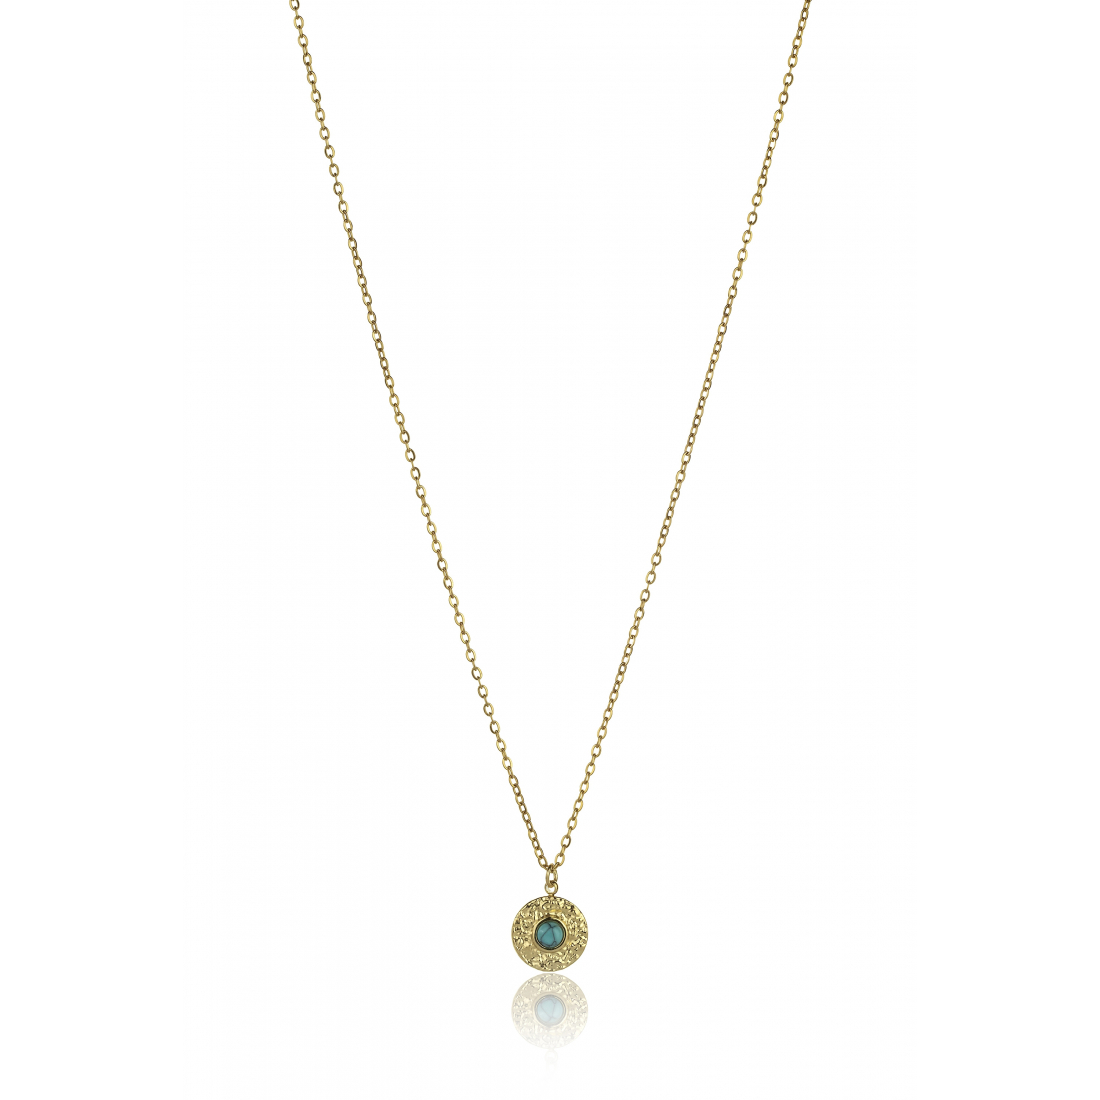 Women's 'Kaylee' Necklace